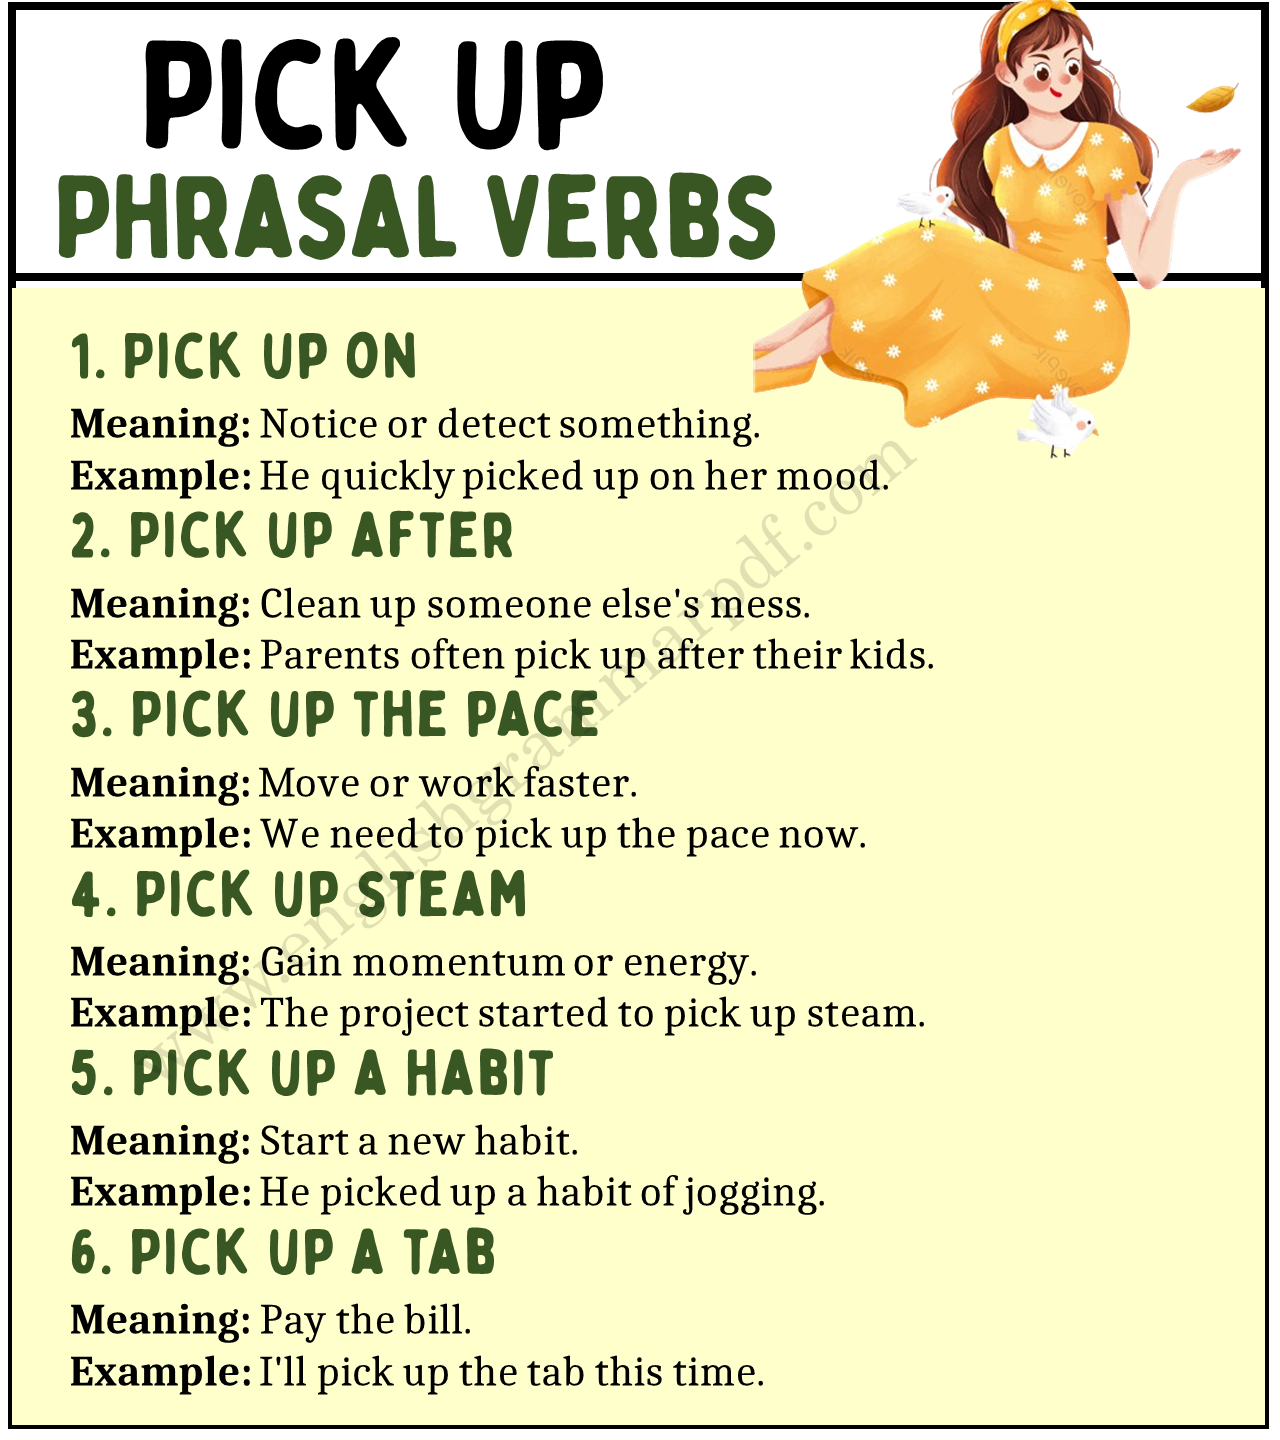 Phrasal Verbs with “Pick Up”